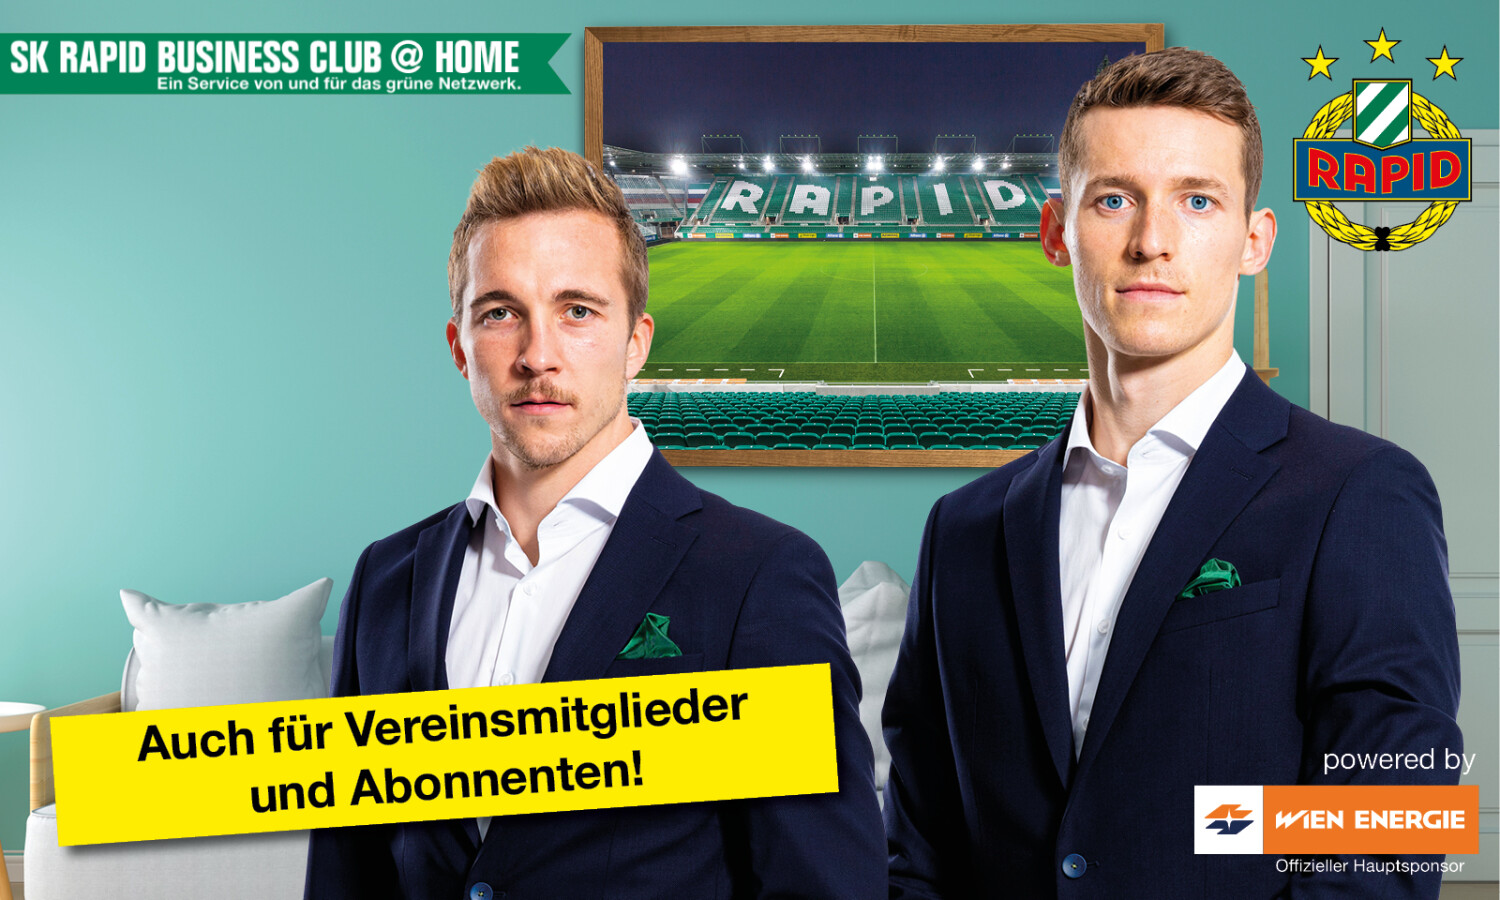 SK Rapid :: SK Rapid Business Club @ Home